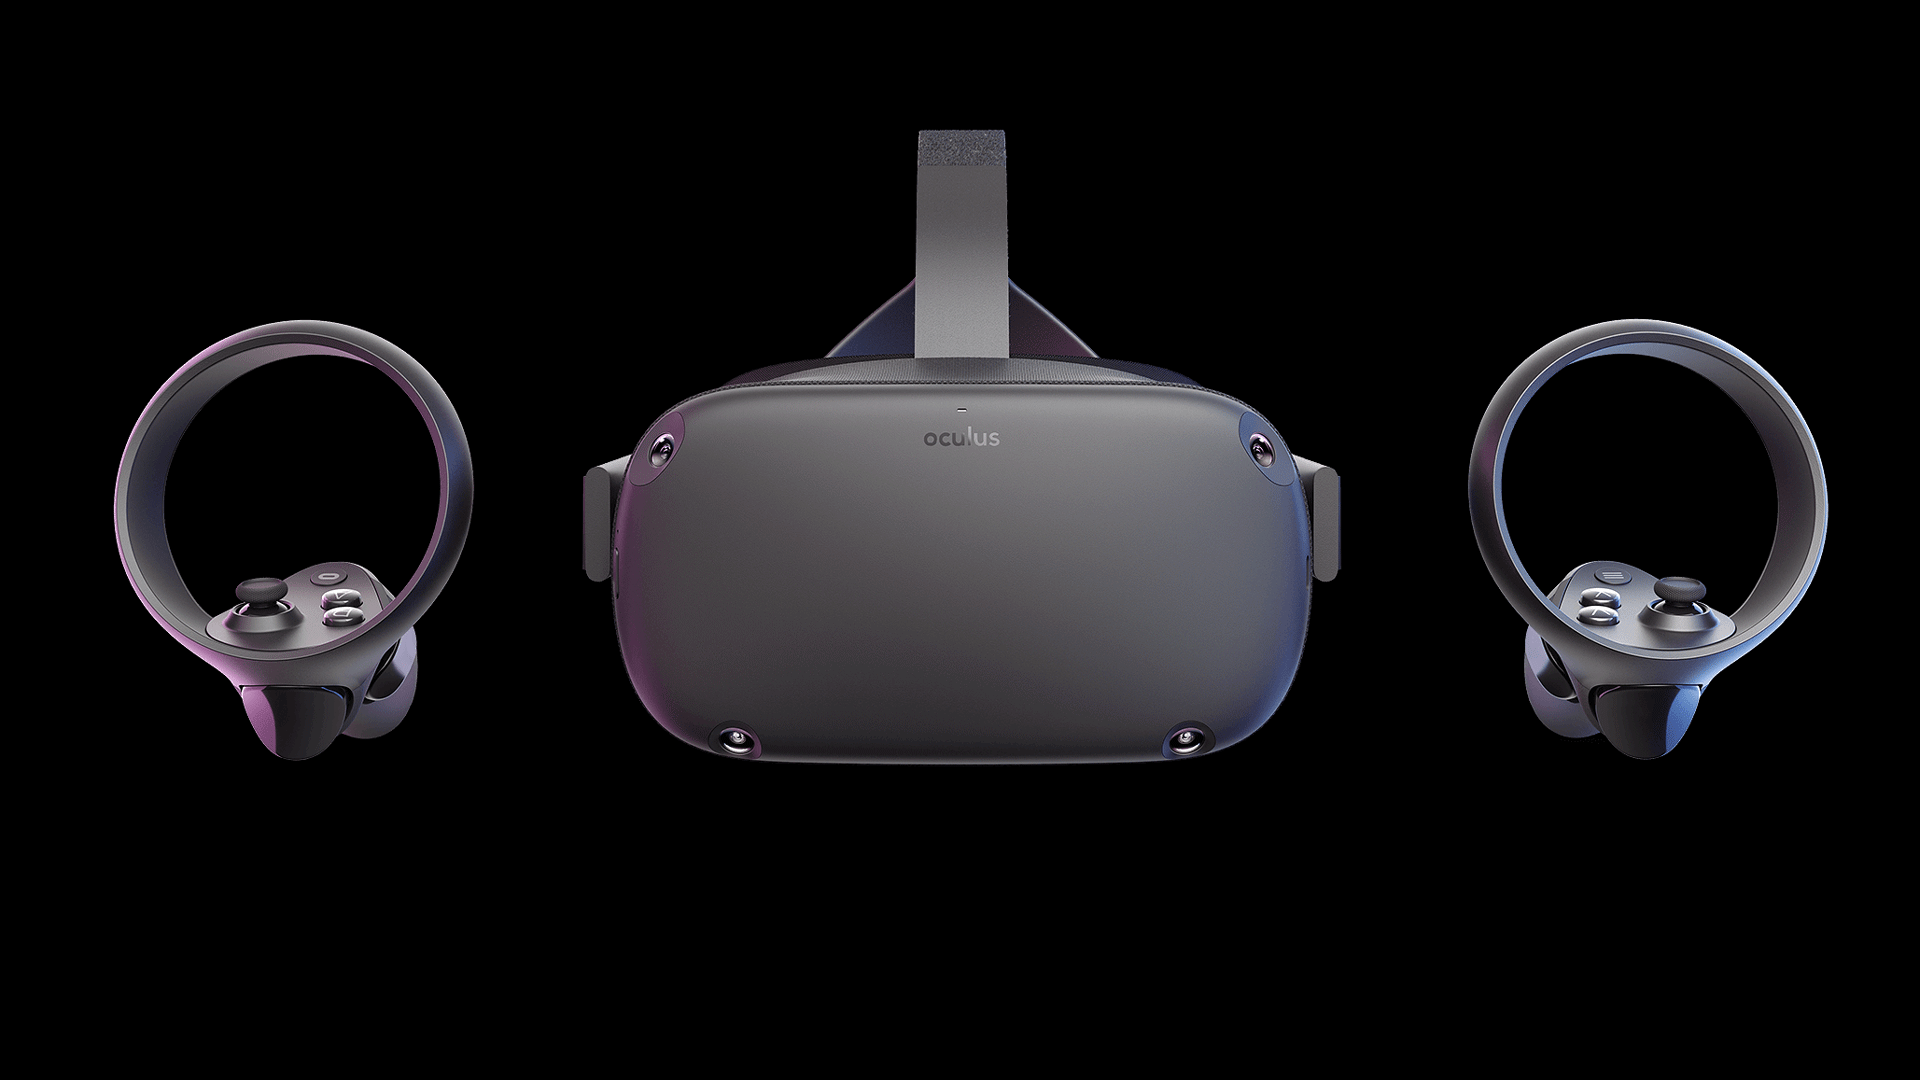 Oculus Quest Hits FCC on Its Way to Spring 2019 Launch